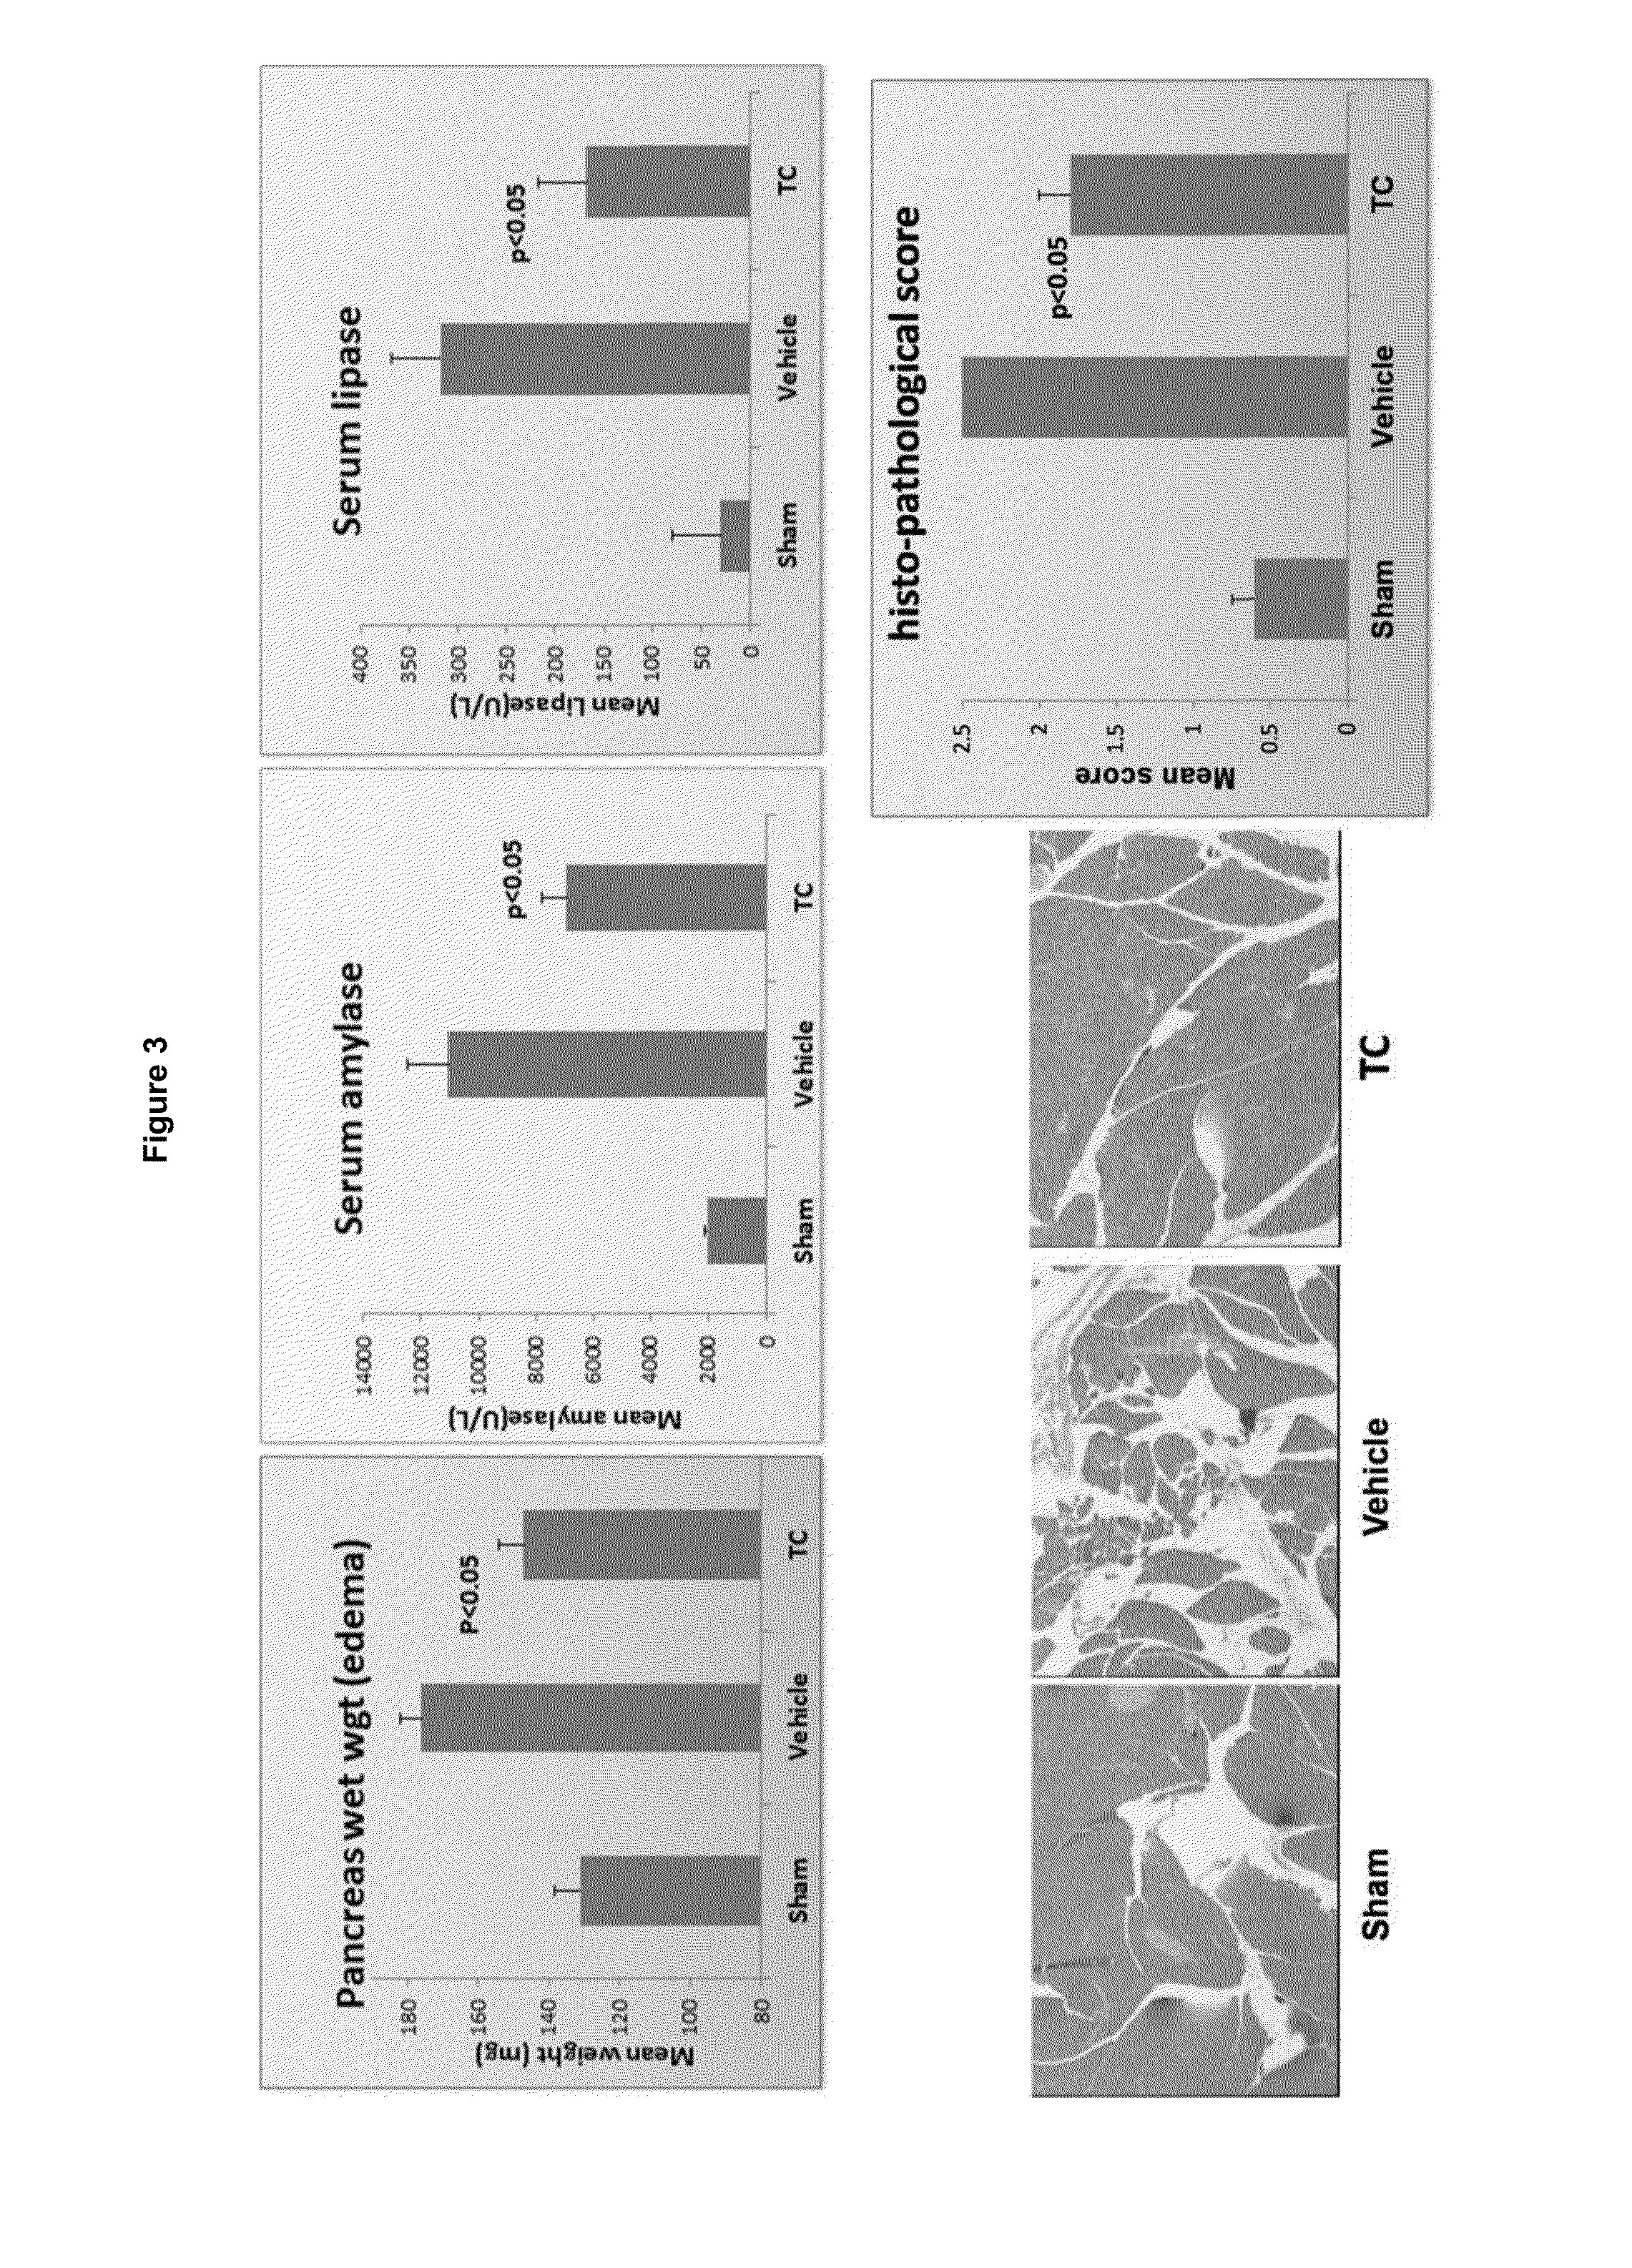 Small molecule Anti-fibrotic compounds and uses thereof